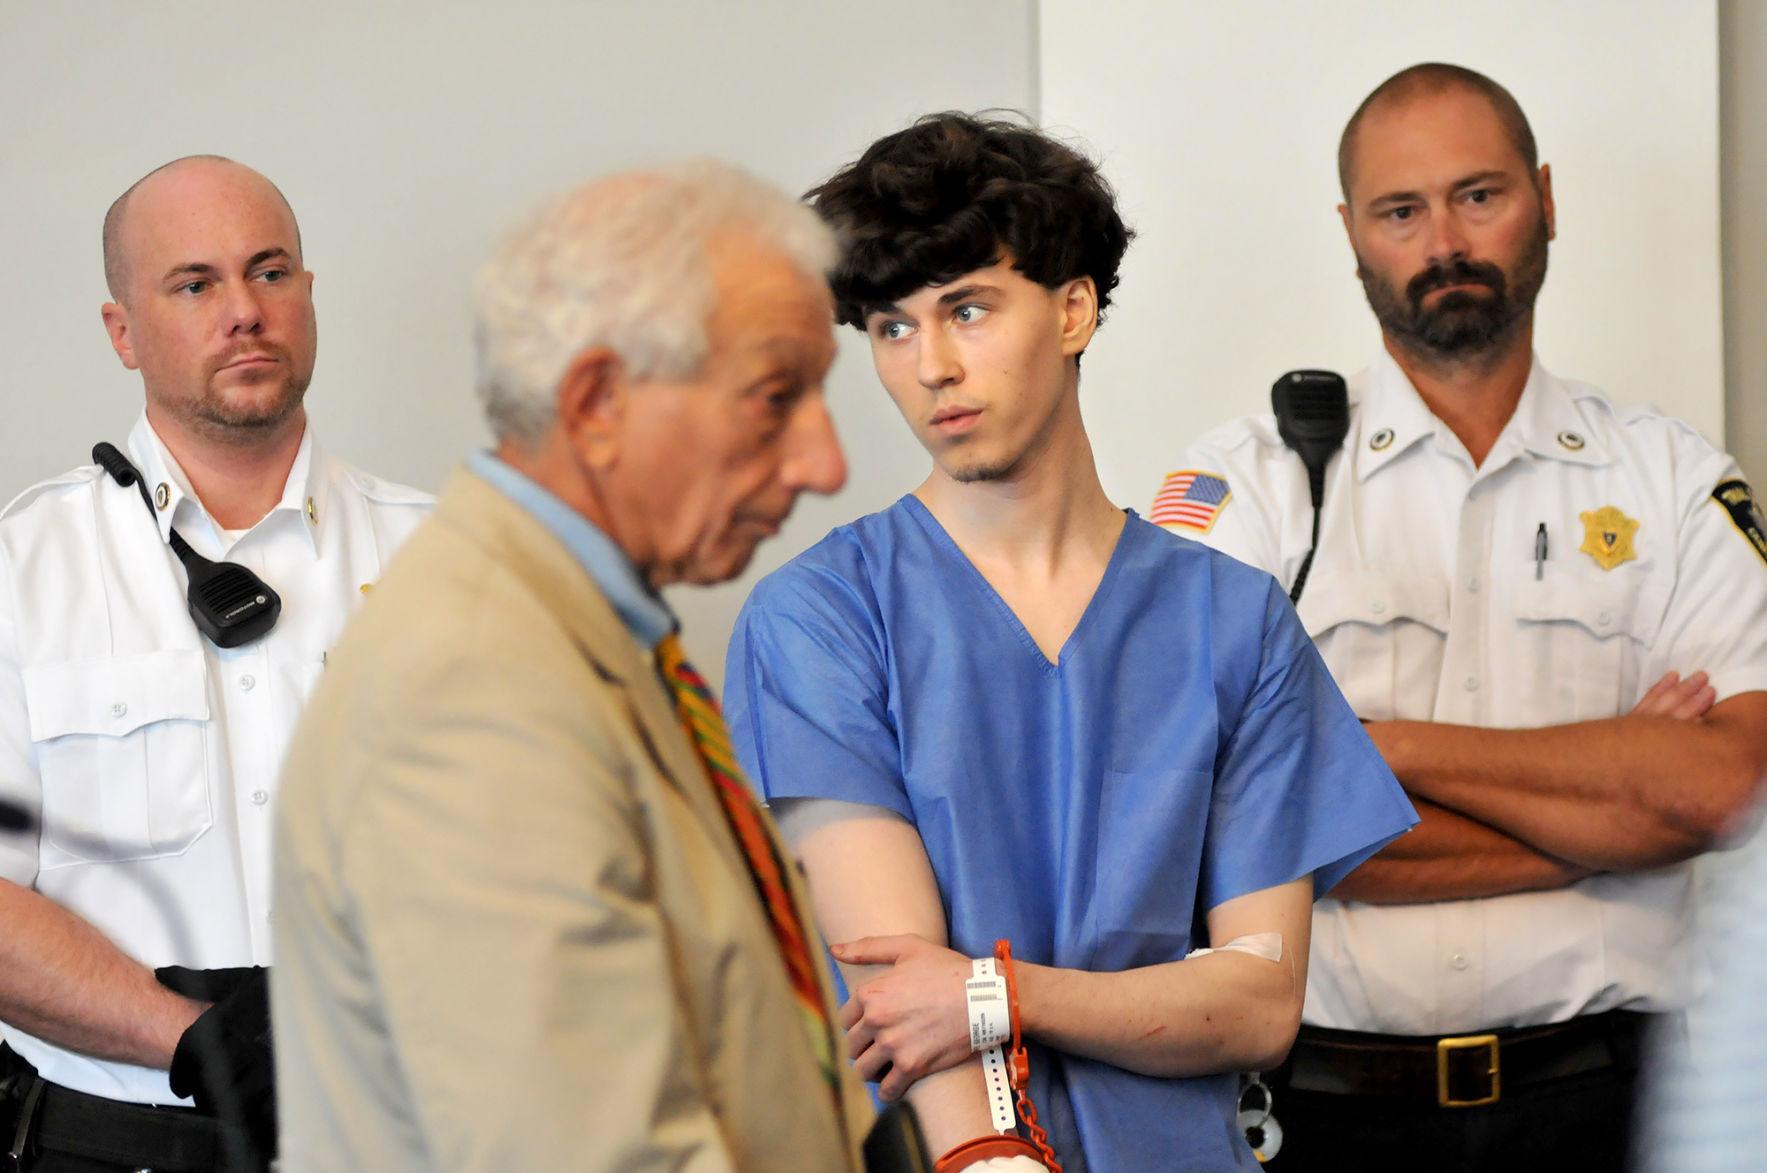 North Attleboro double murder suspect indicted by grand jury Local